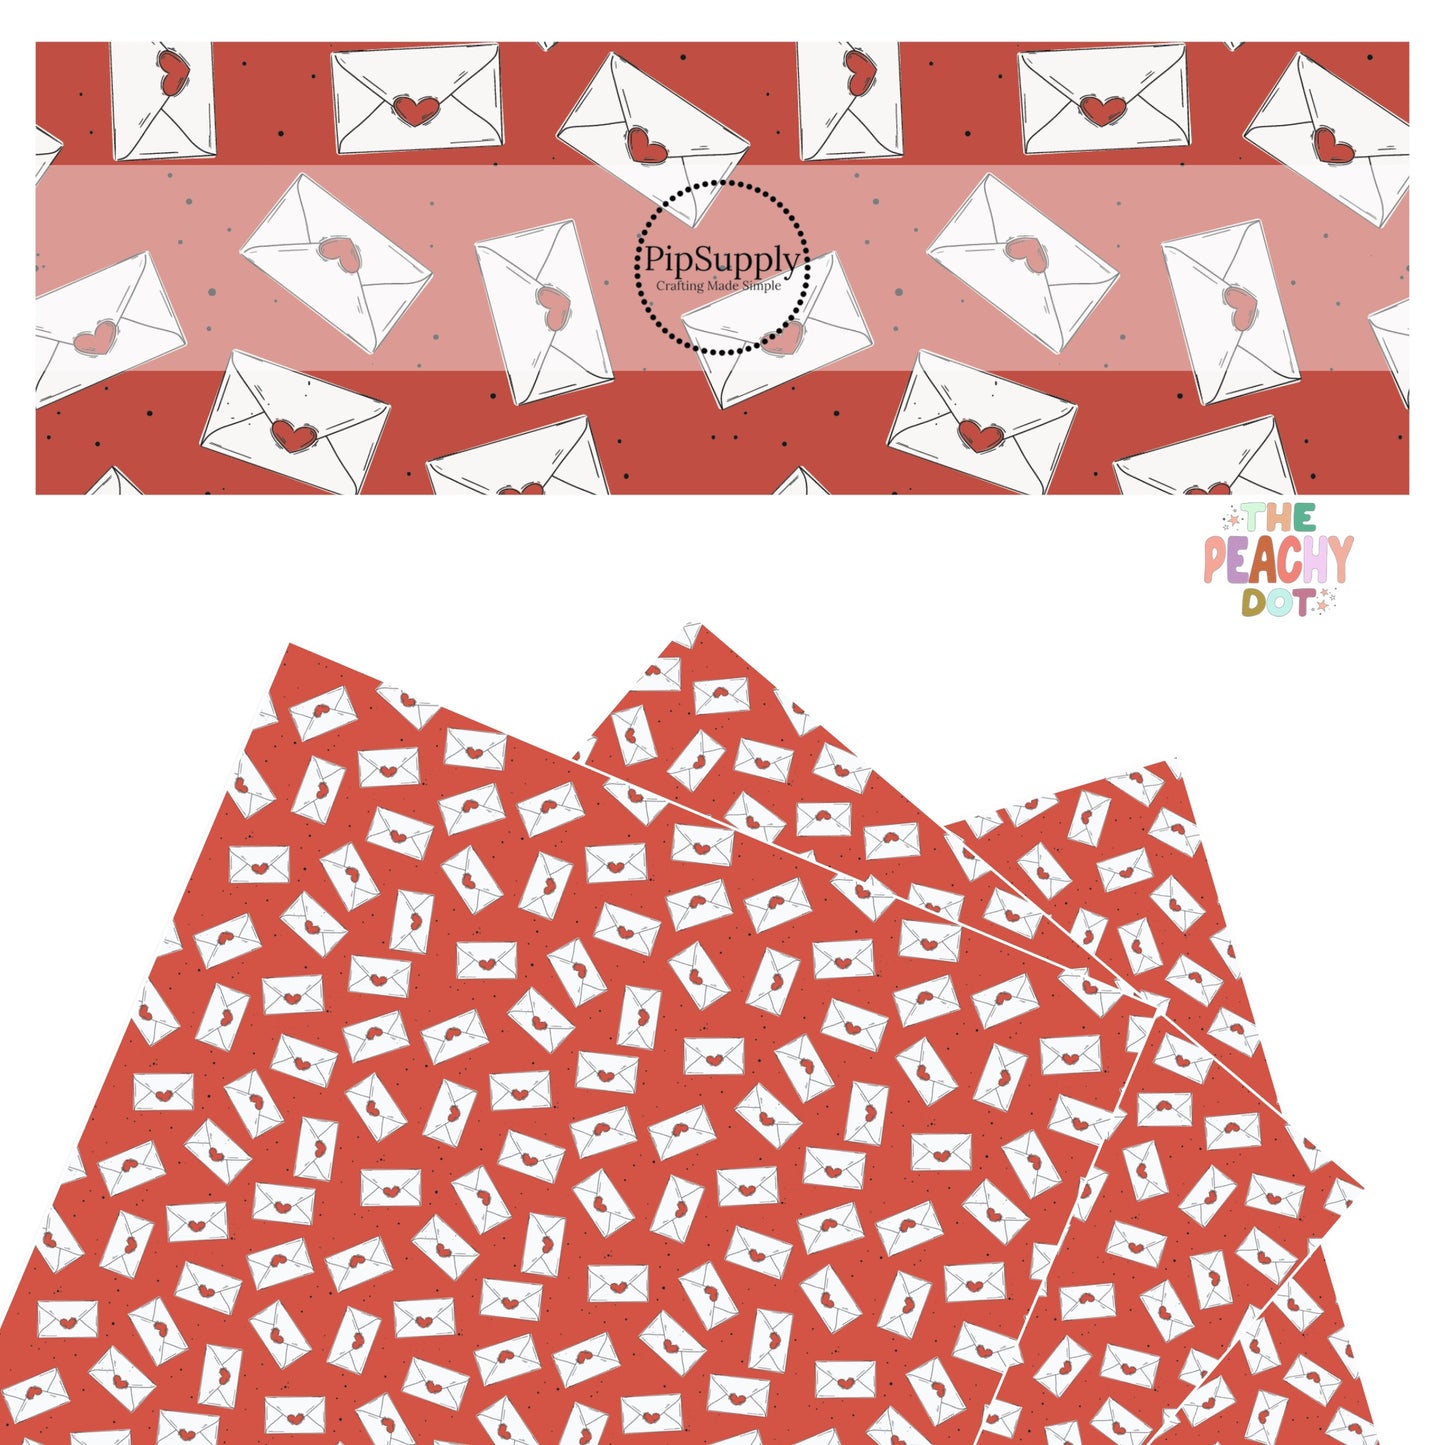 Red heart mail with black polka dots on red faux leather sheets